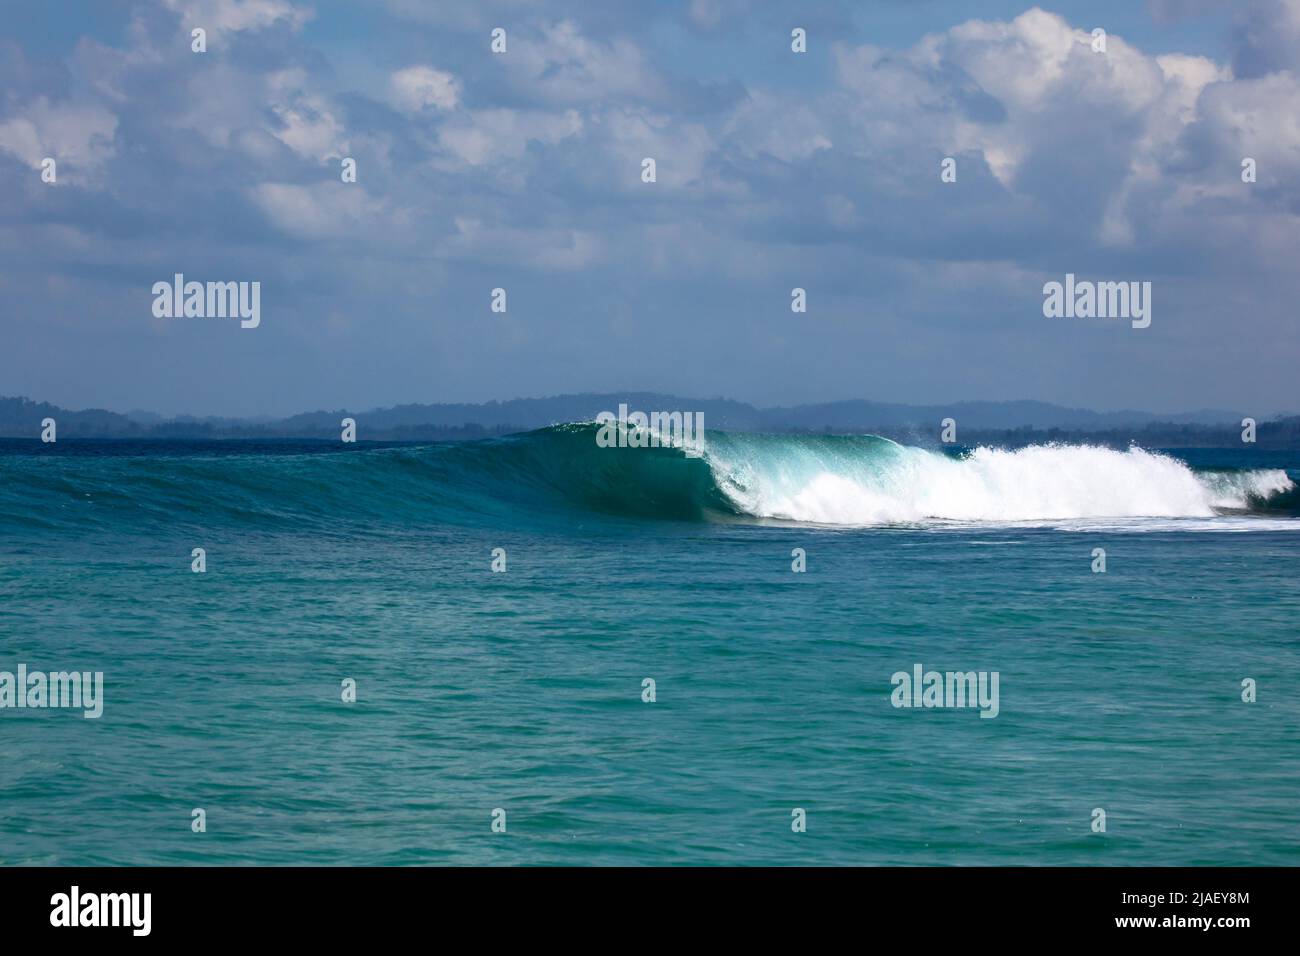 A wave goes unridden at 'Pitstops' surf break in the Mentawai Islands off Sumatra's West Coast. There are many surf breaks in this area that people tr Stock Photo